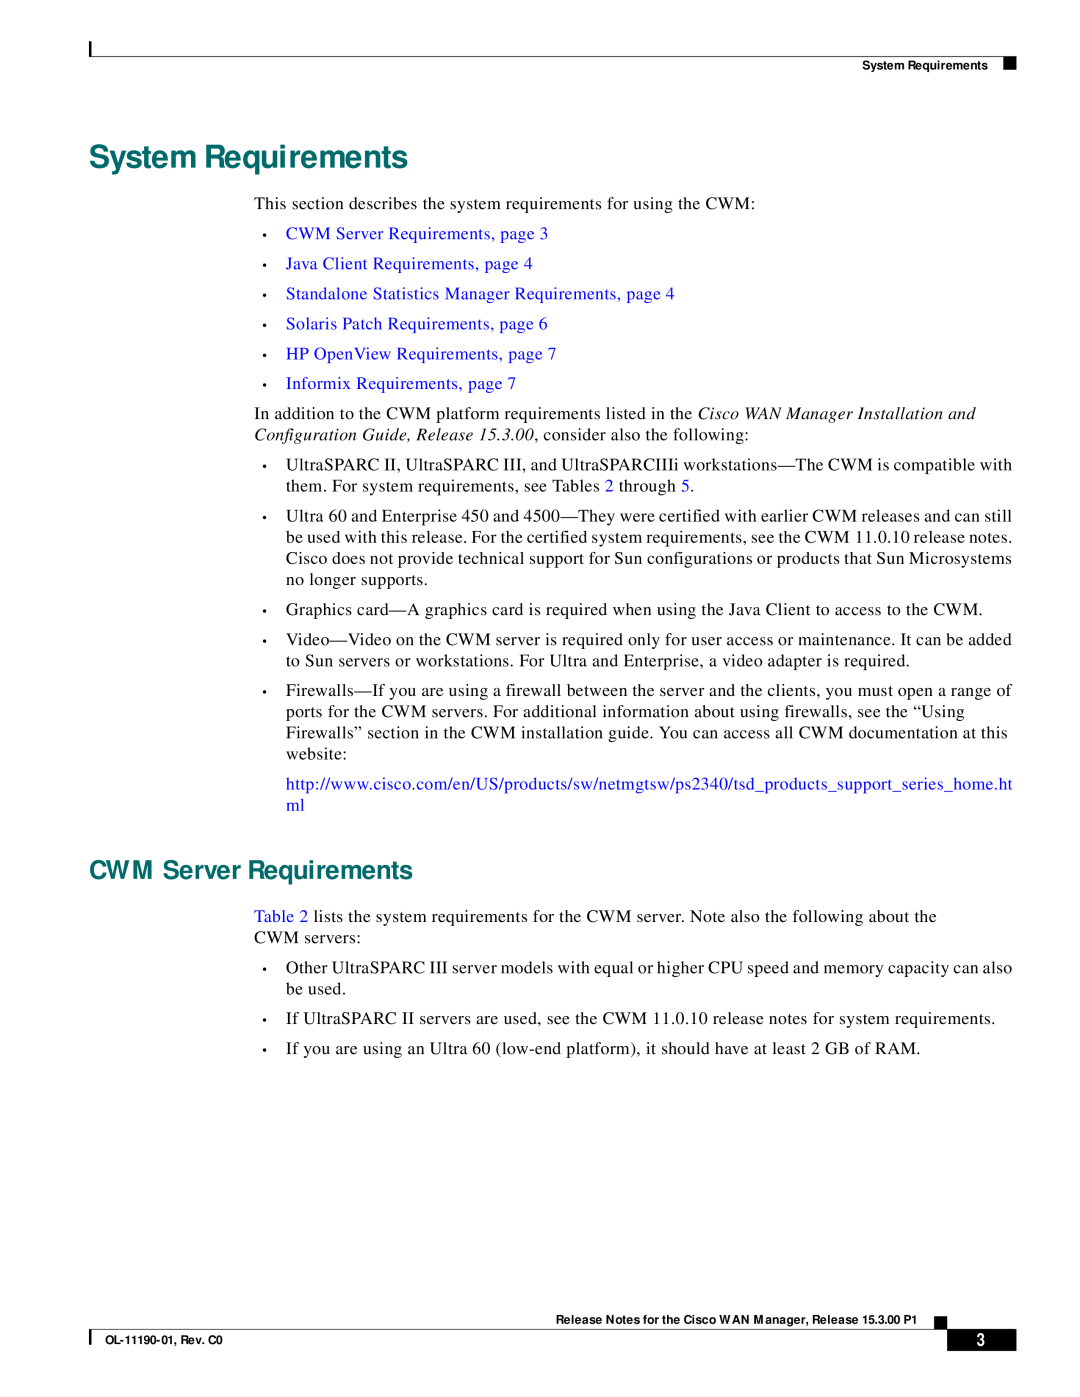 Cisco Systems 15.3.00P1 System Requirements, CWM Server Requirements, Standalone Statistics Manager Requirements, page 